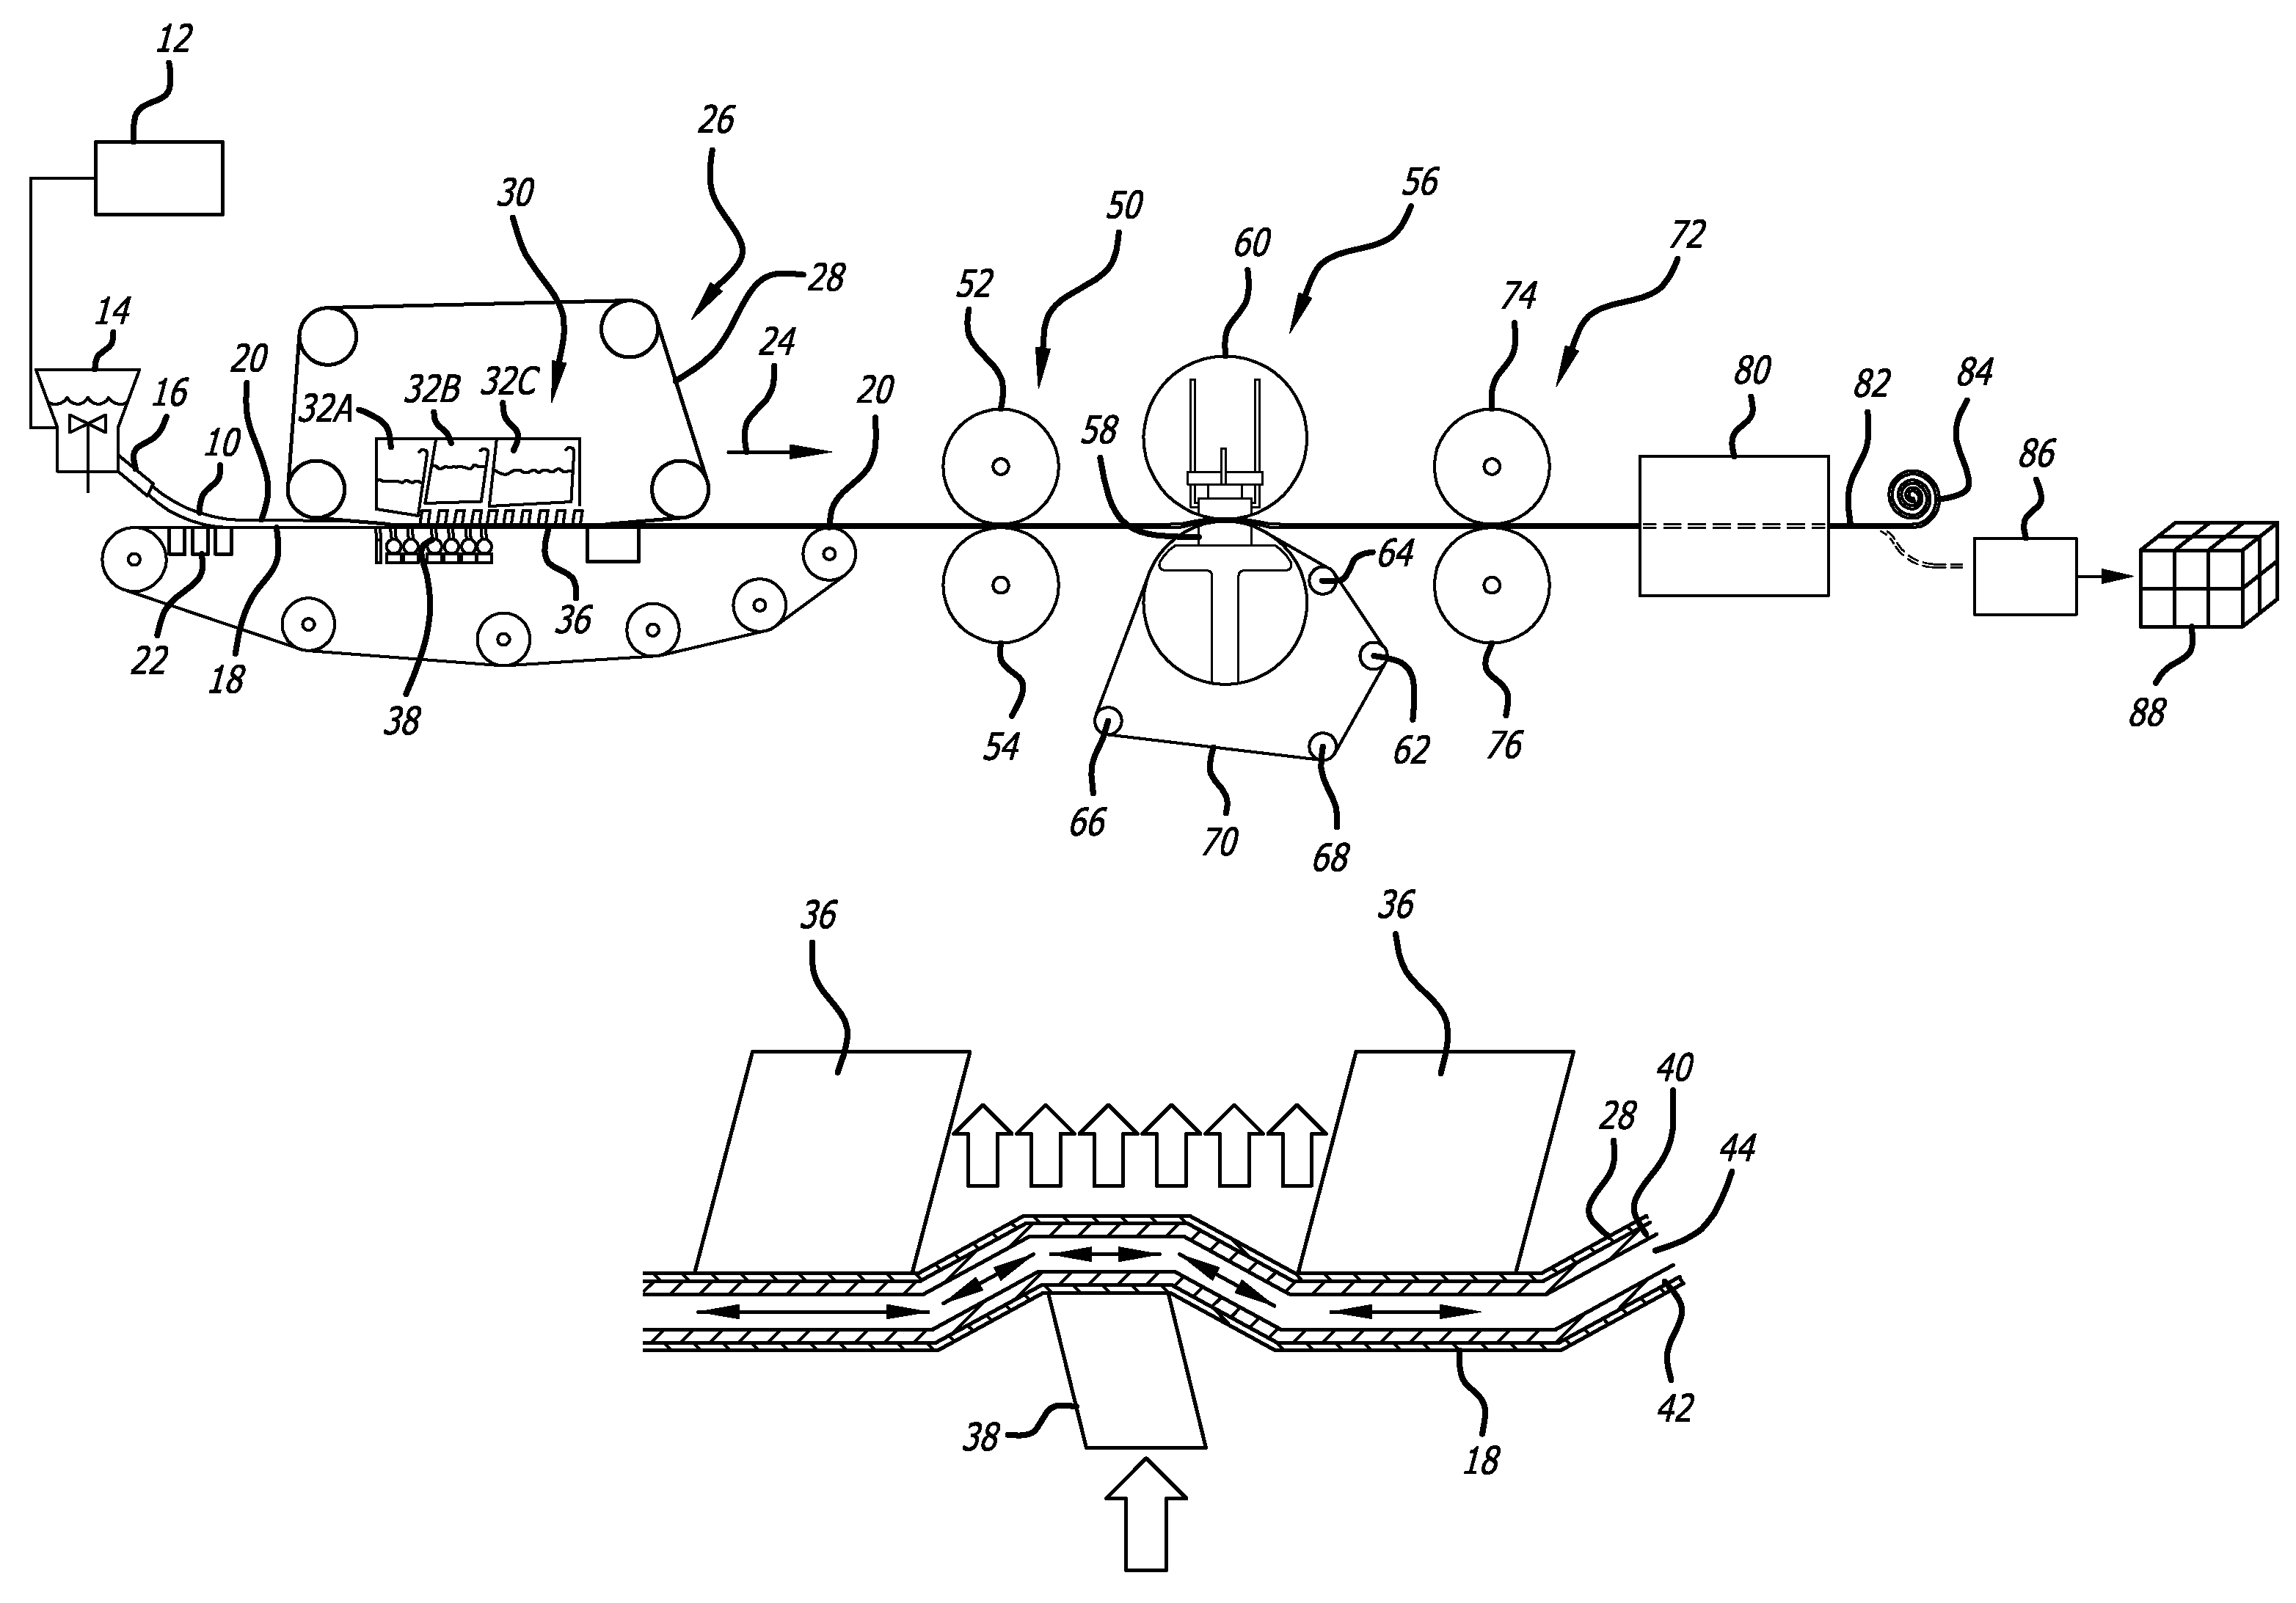 Methods and apparatus for forming fluff pulp sheets